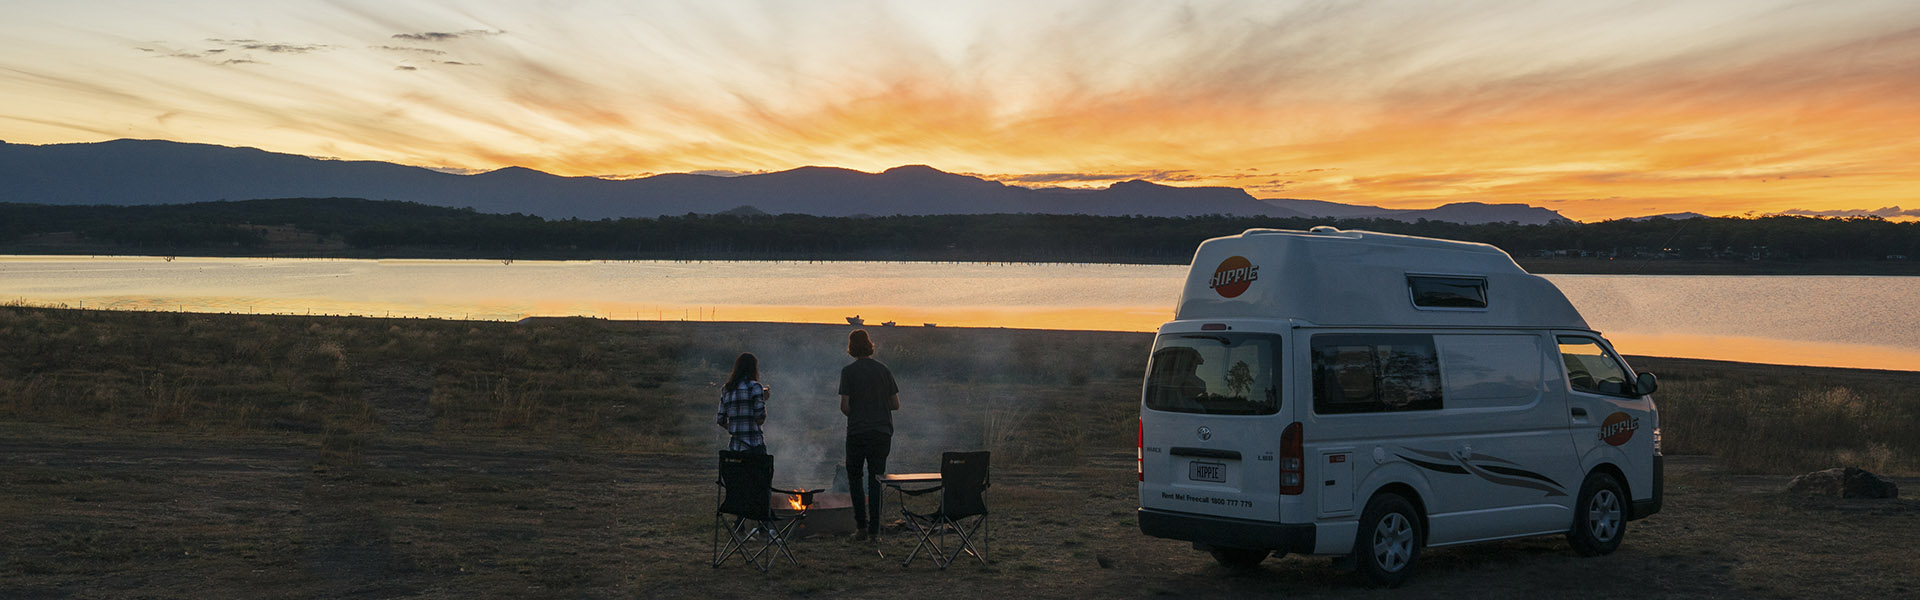 Two people watch a sunset over a lake next to their Hippie Camper